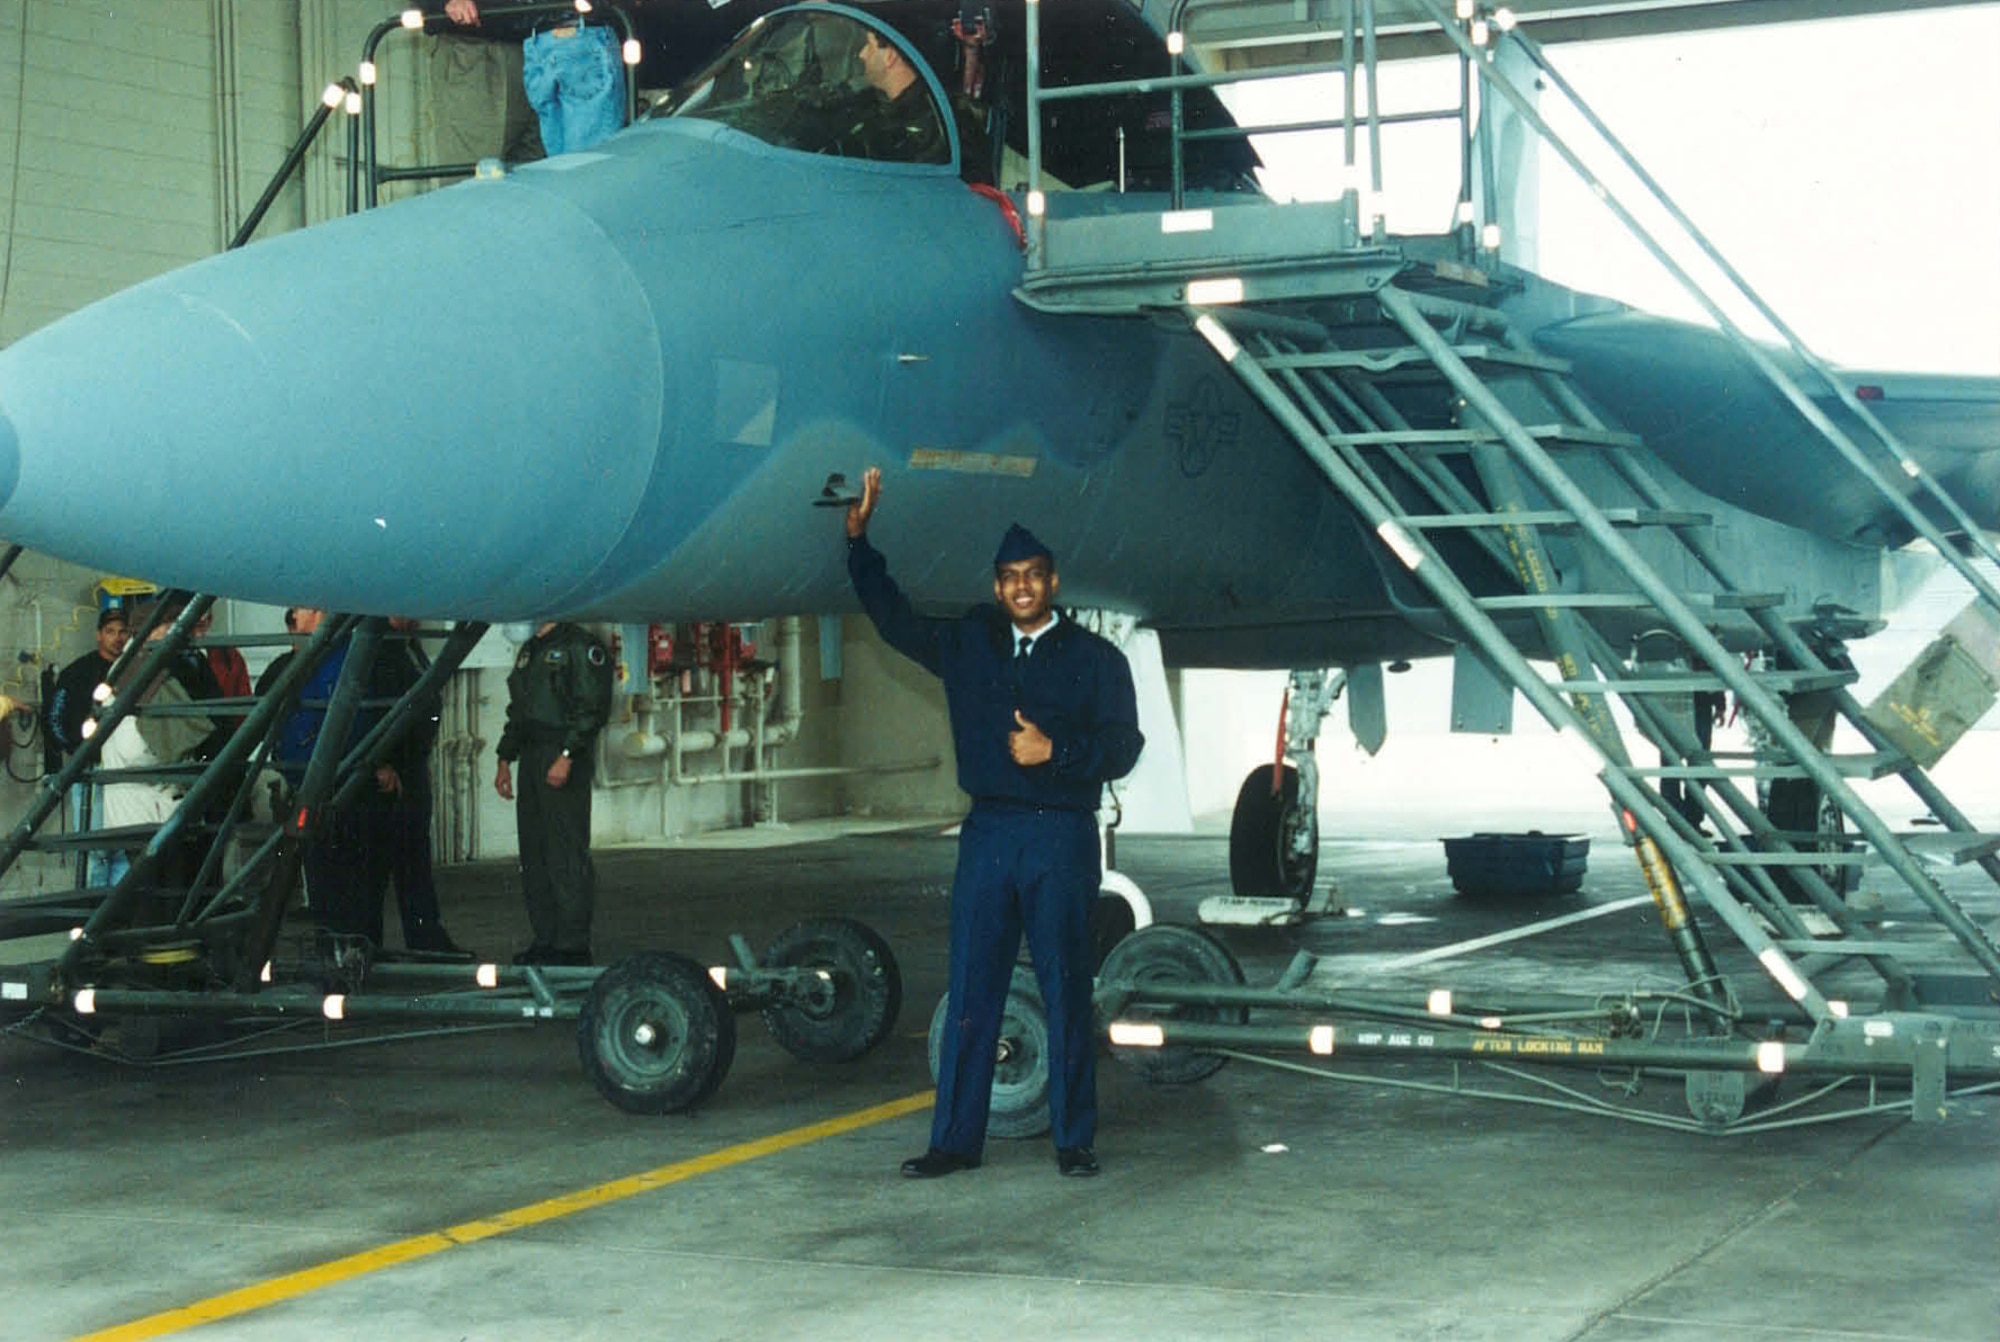 Airman First Class David Atchison poses in front of an F-15 Eagle at Robins Air Force Base, Georgia. (Photo courtesty of David Atchison)